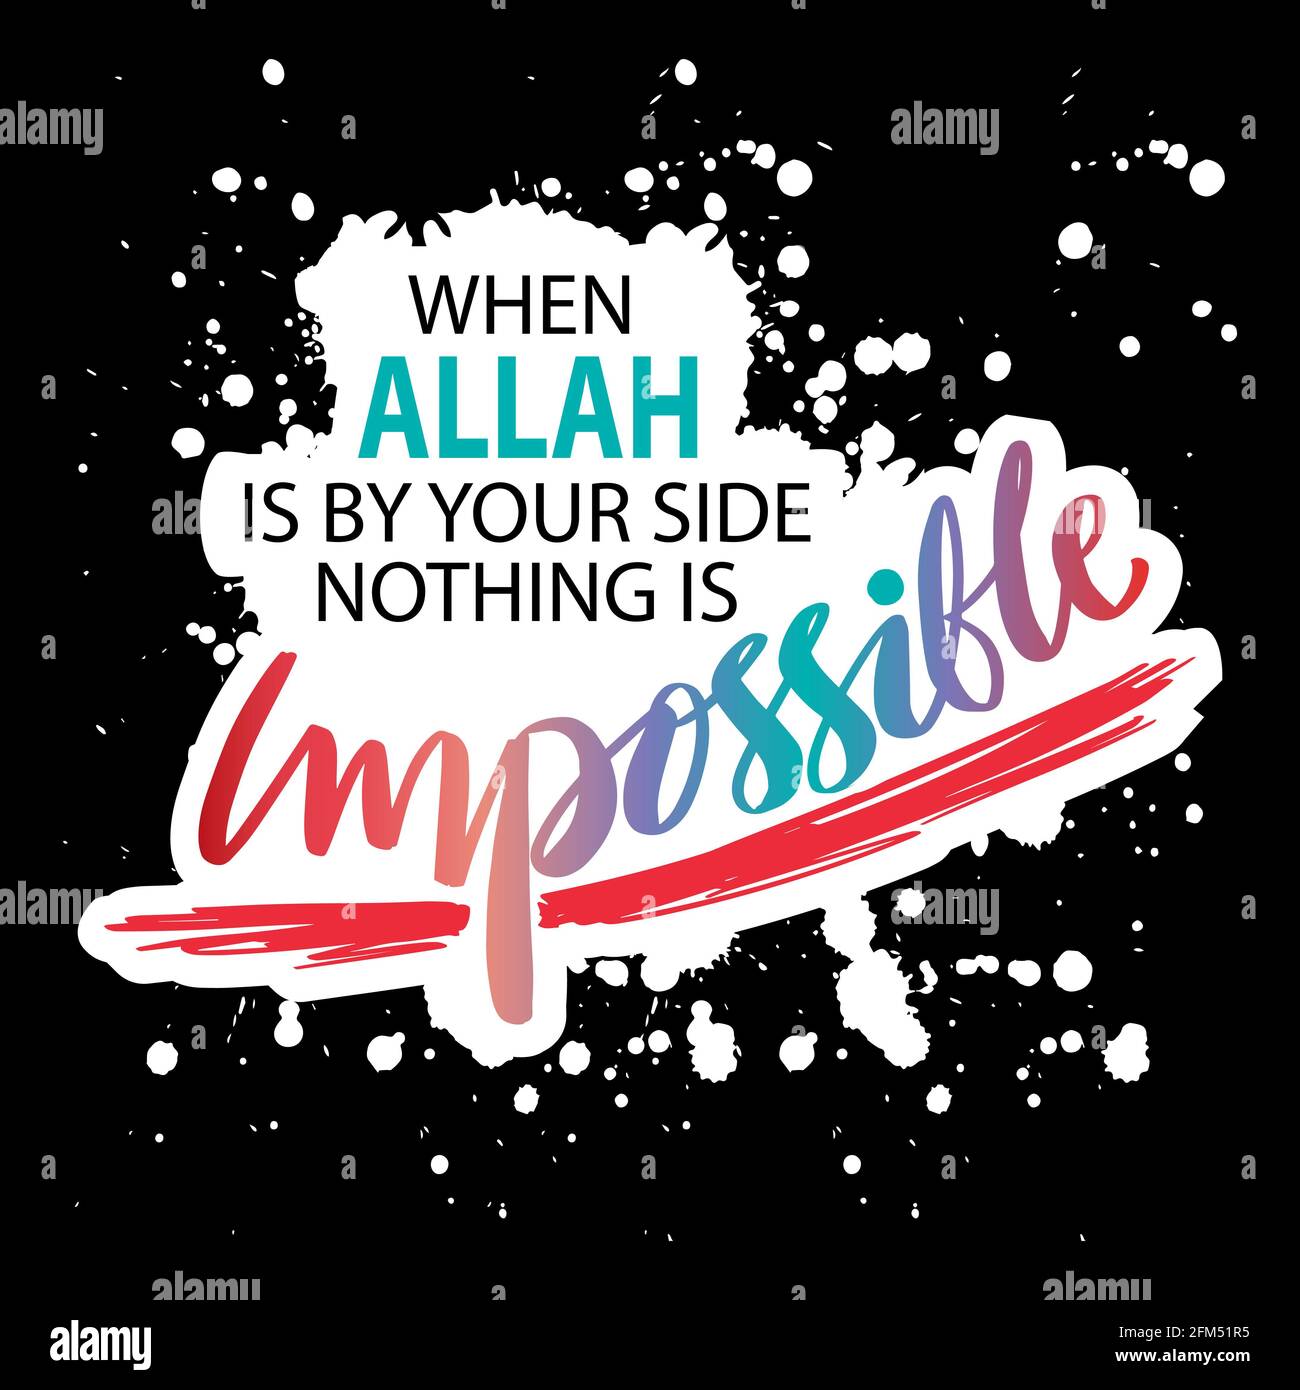 When Allah is by your side nothing is impossible. Islamic Quote. Stock Photo